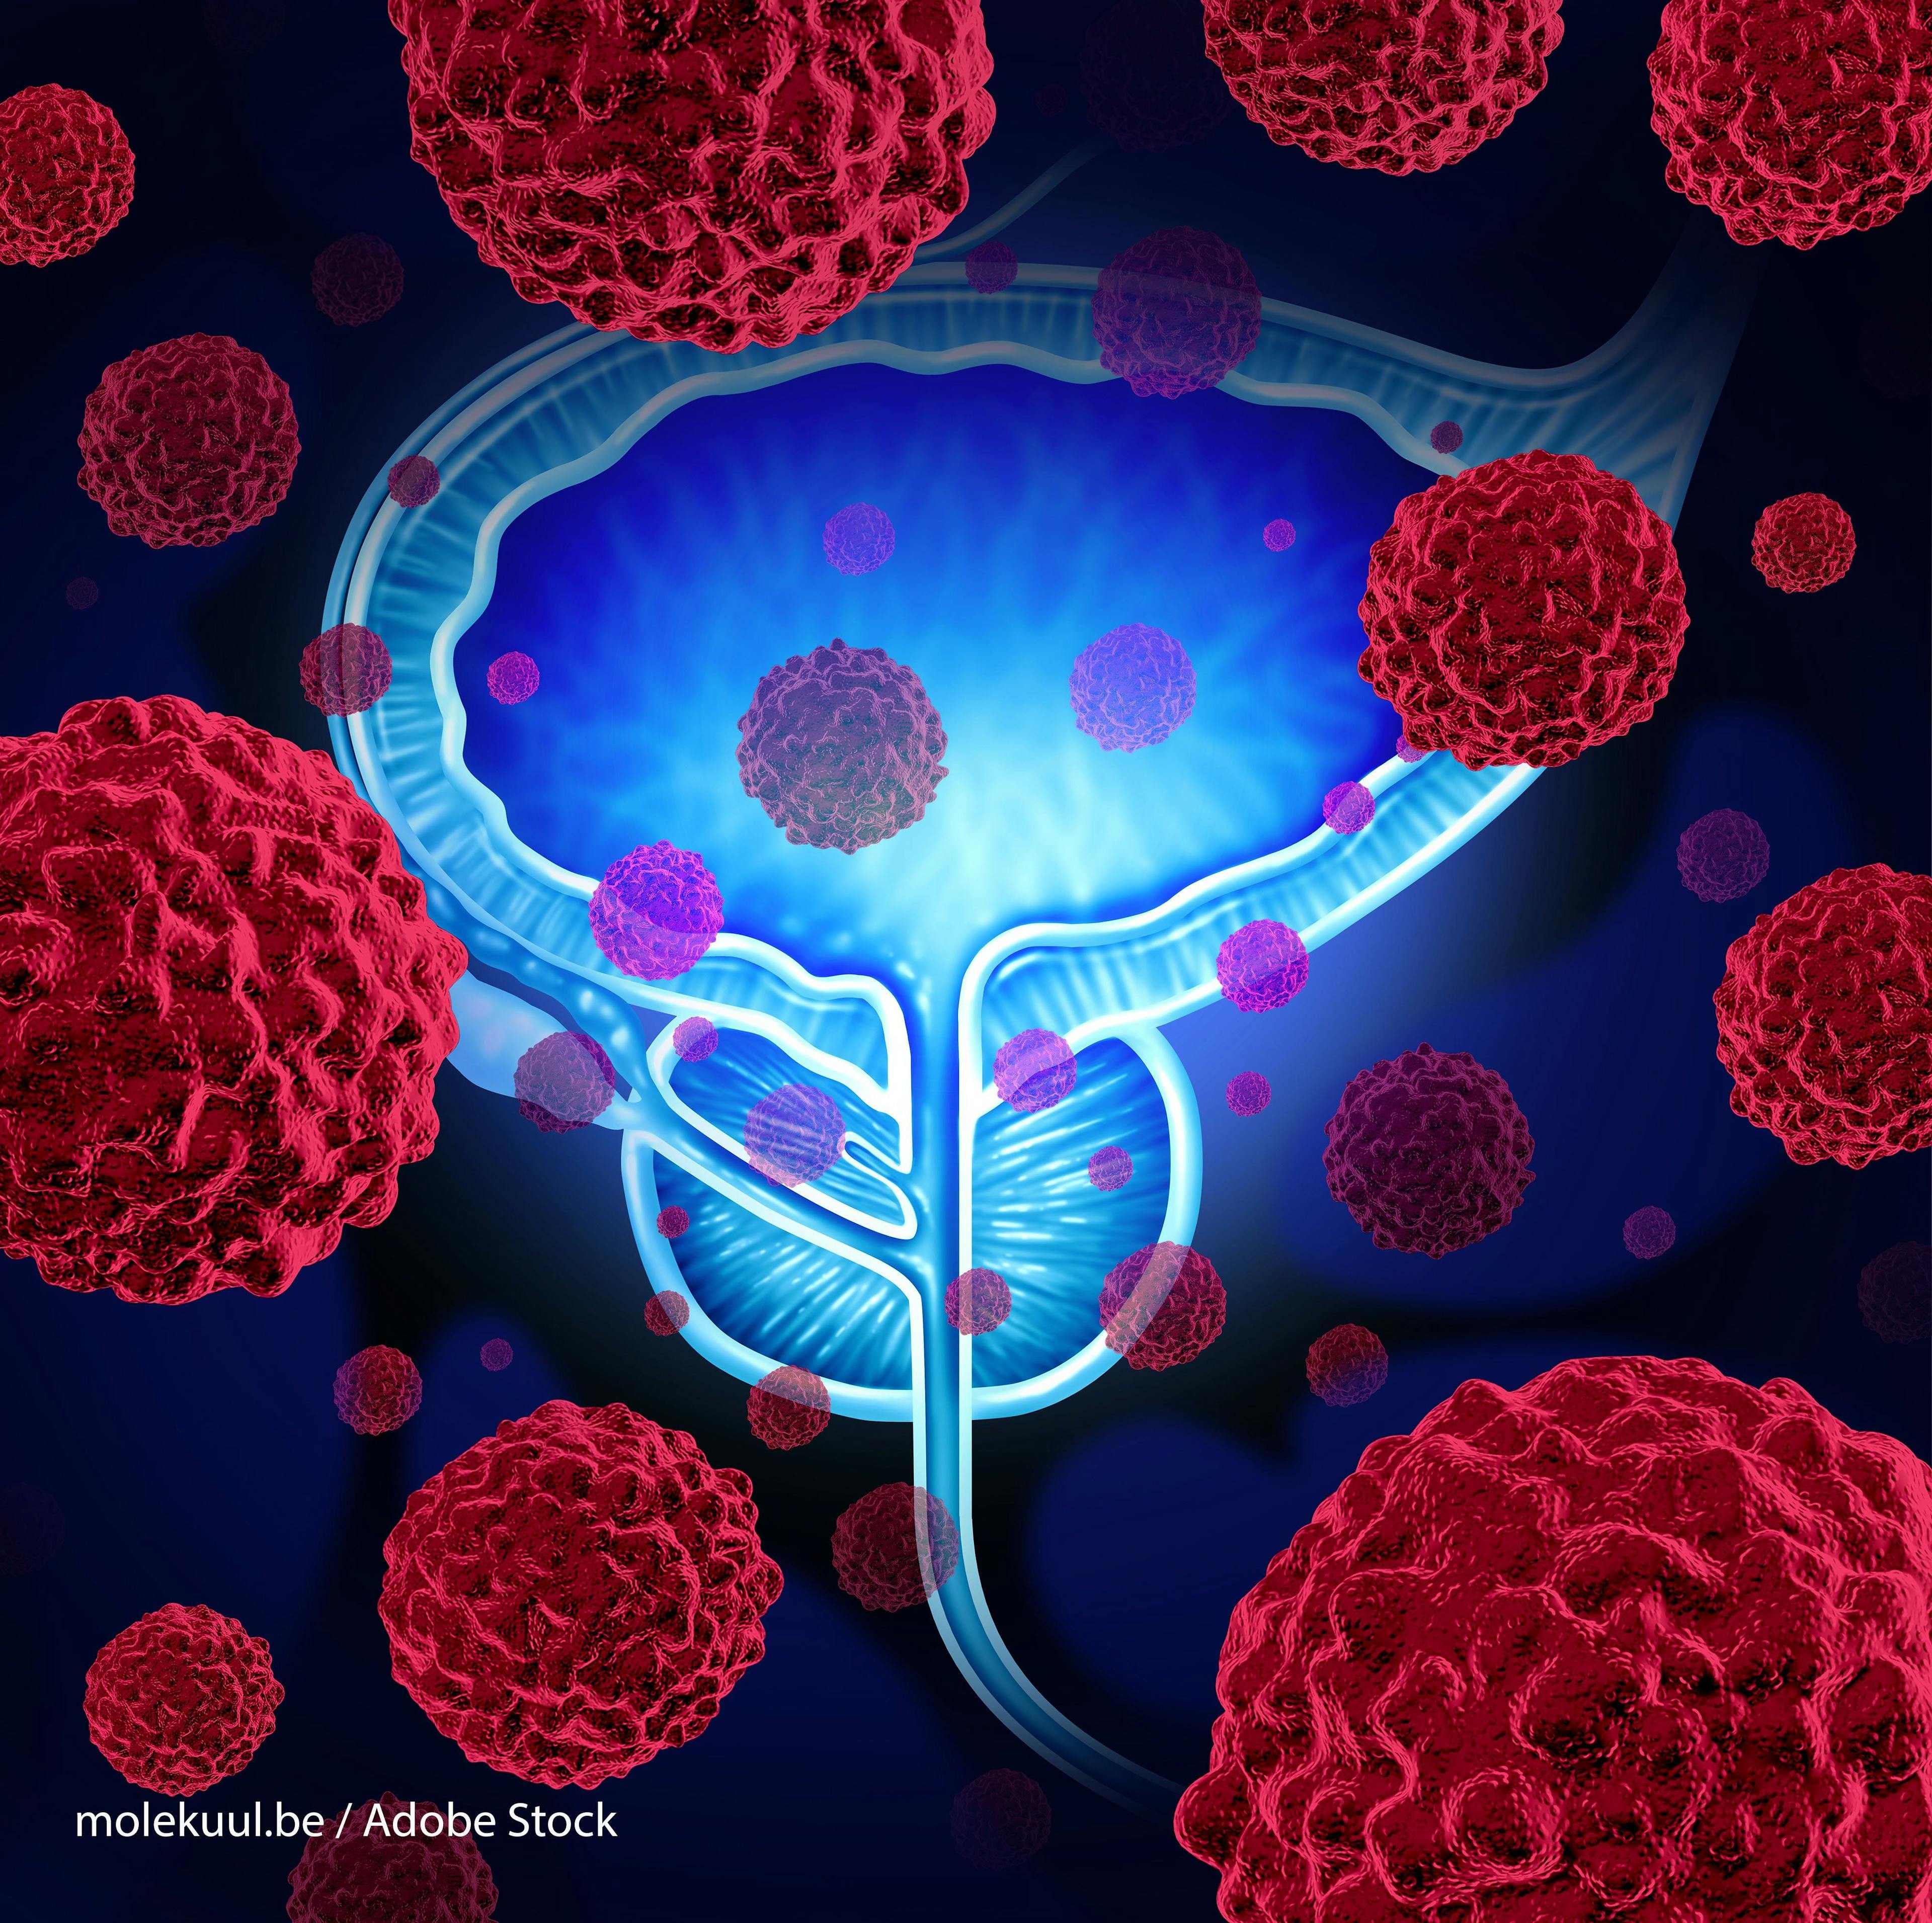 Radical Prostatectomy Plus Radiotherapy Extends OS in Prostate Cancer